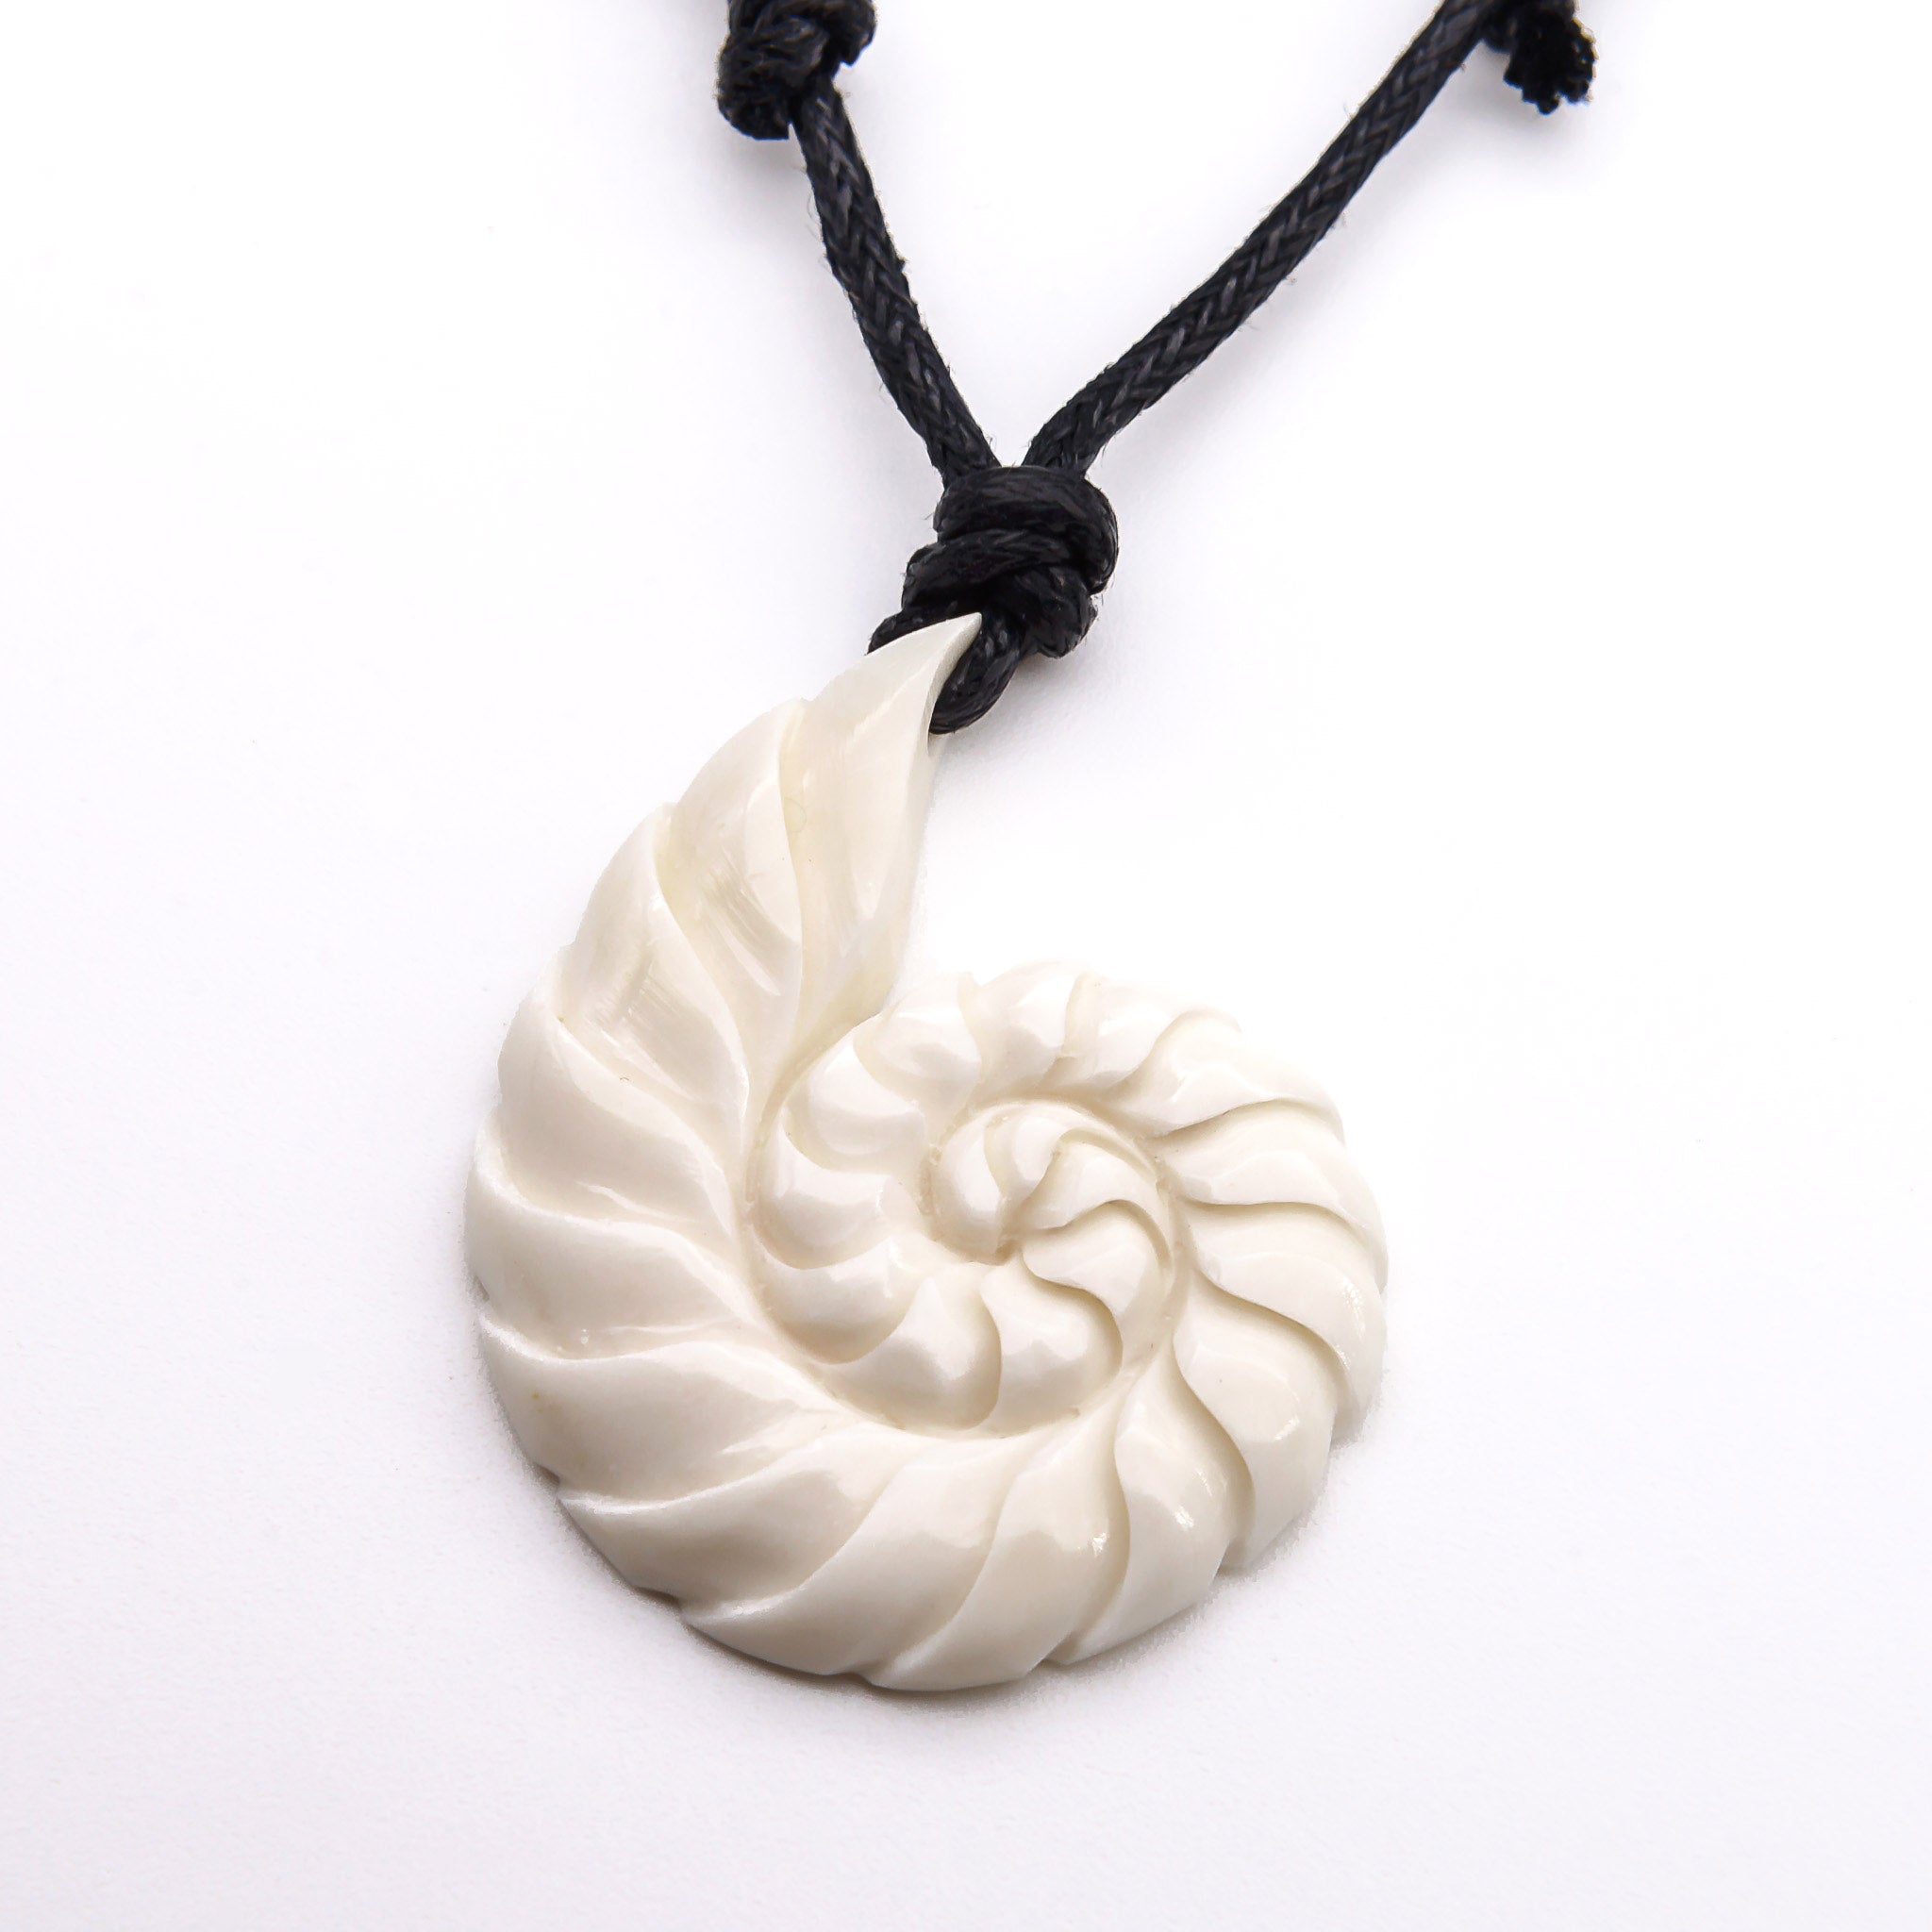 Intricate Carved Bone Beaded Necklace with Pendant 24